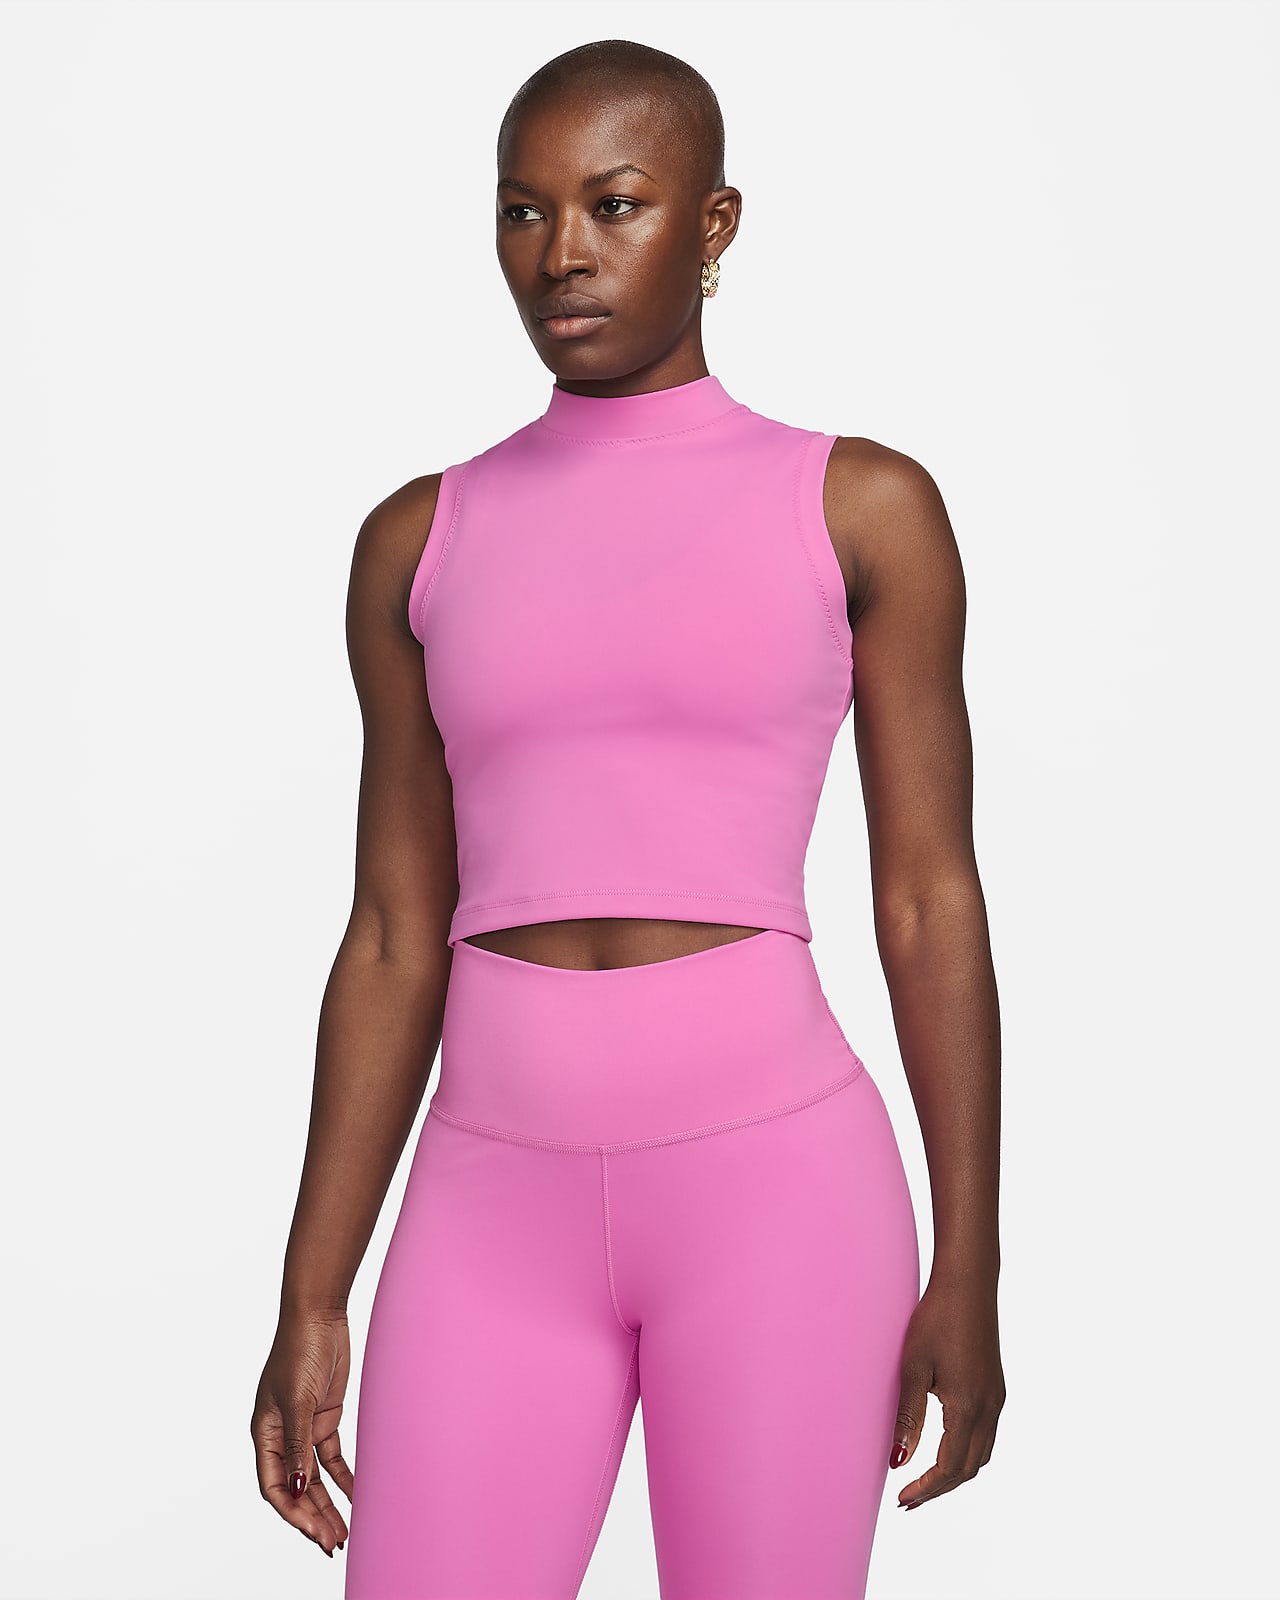 https://static.nike.com/a/images/t_PDP_1280_v1/f_auto,q_auto:eco/d4c51ea5-12e1-496d-9b7d-e52ed2202937/one-fitted-womens-dri-fit-mock-neck-cropped-tank-top-ZRN3F4.png